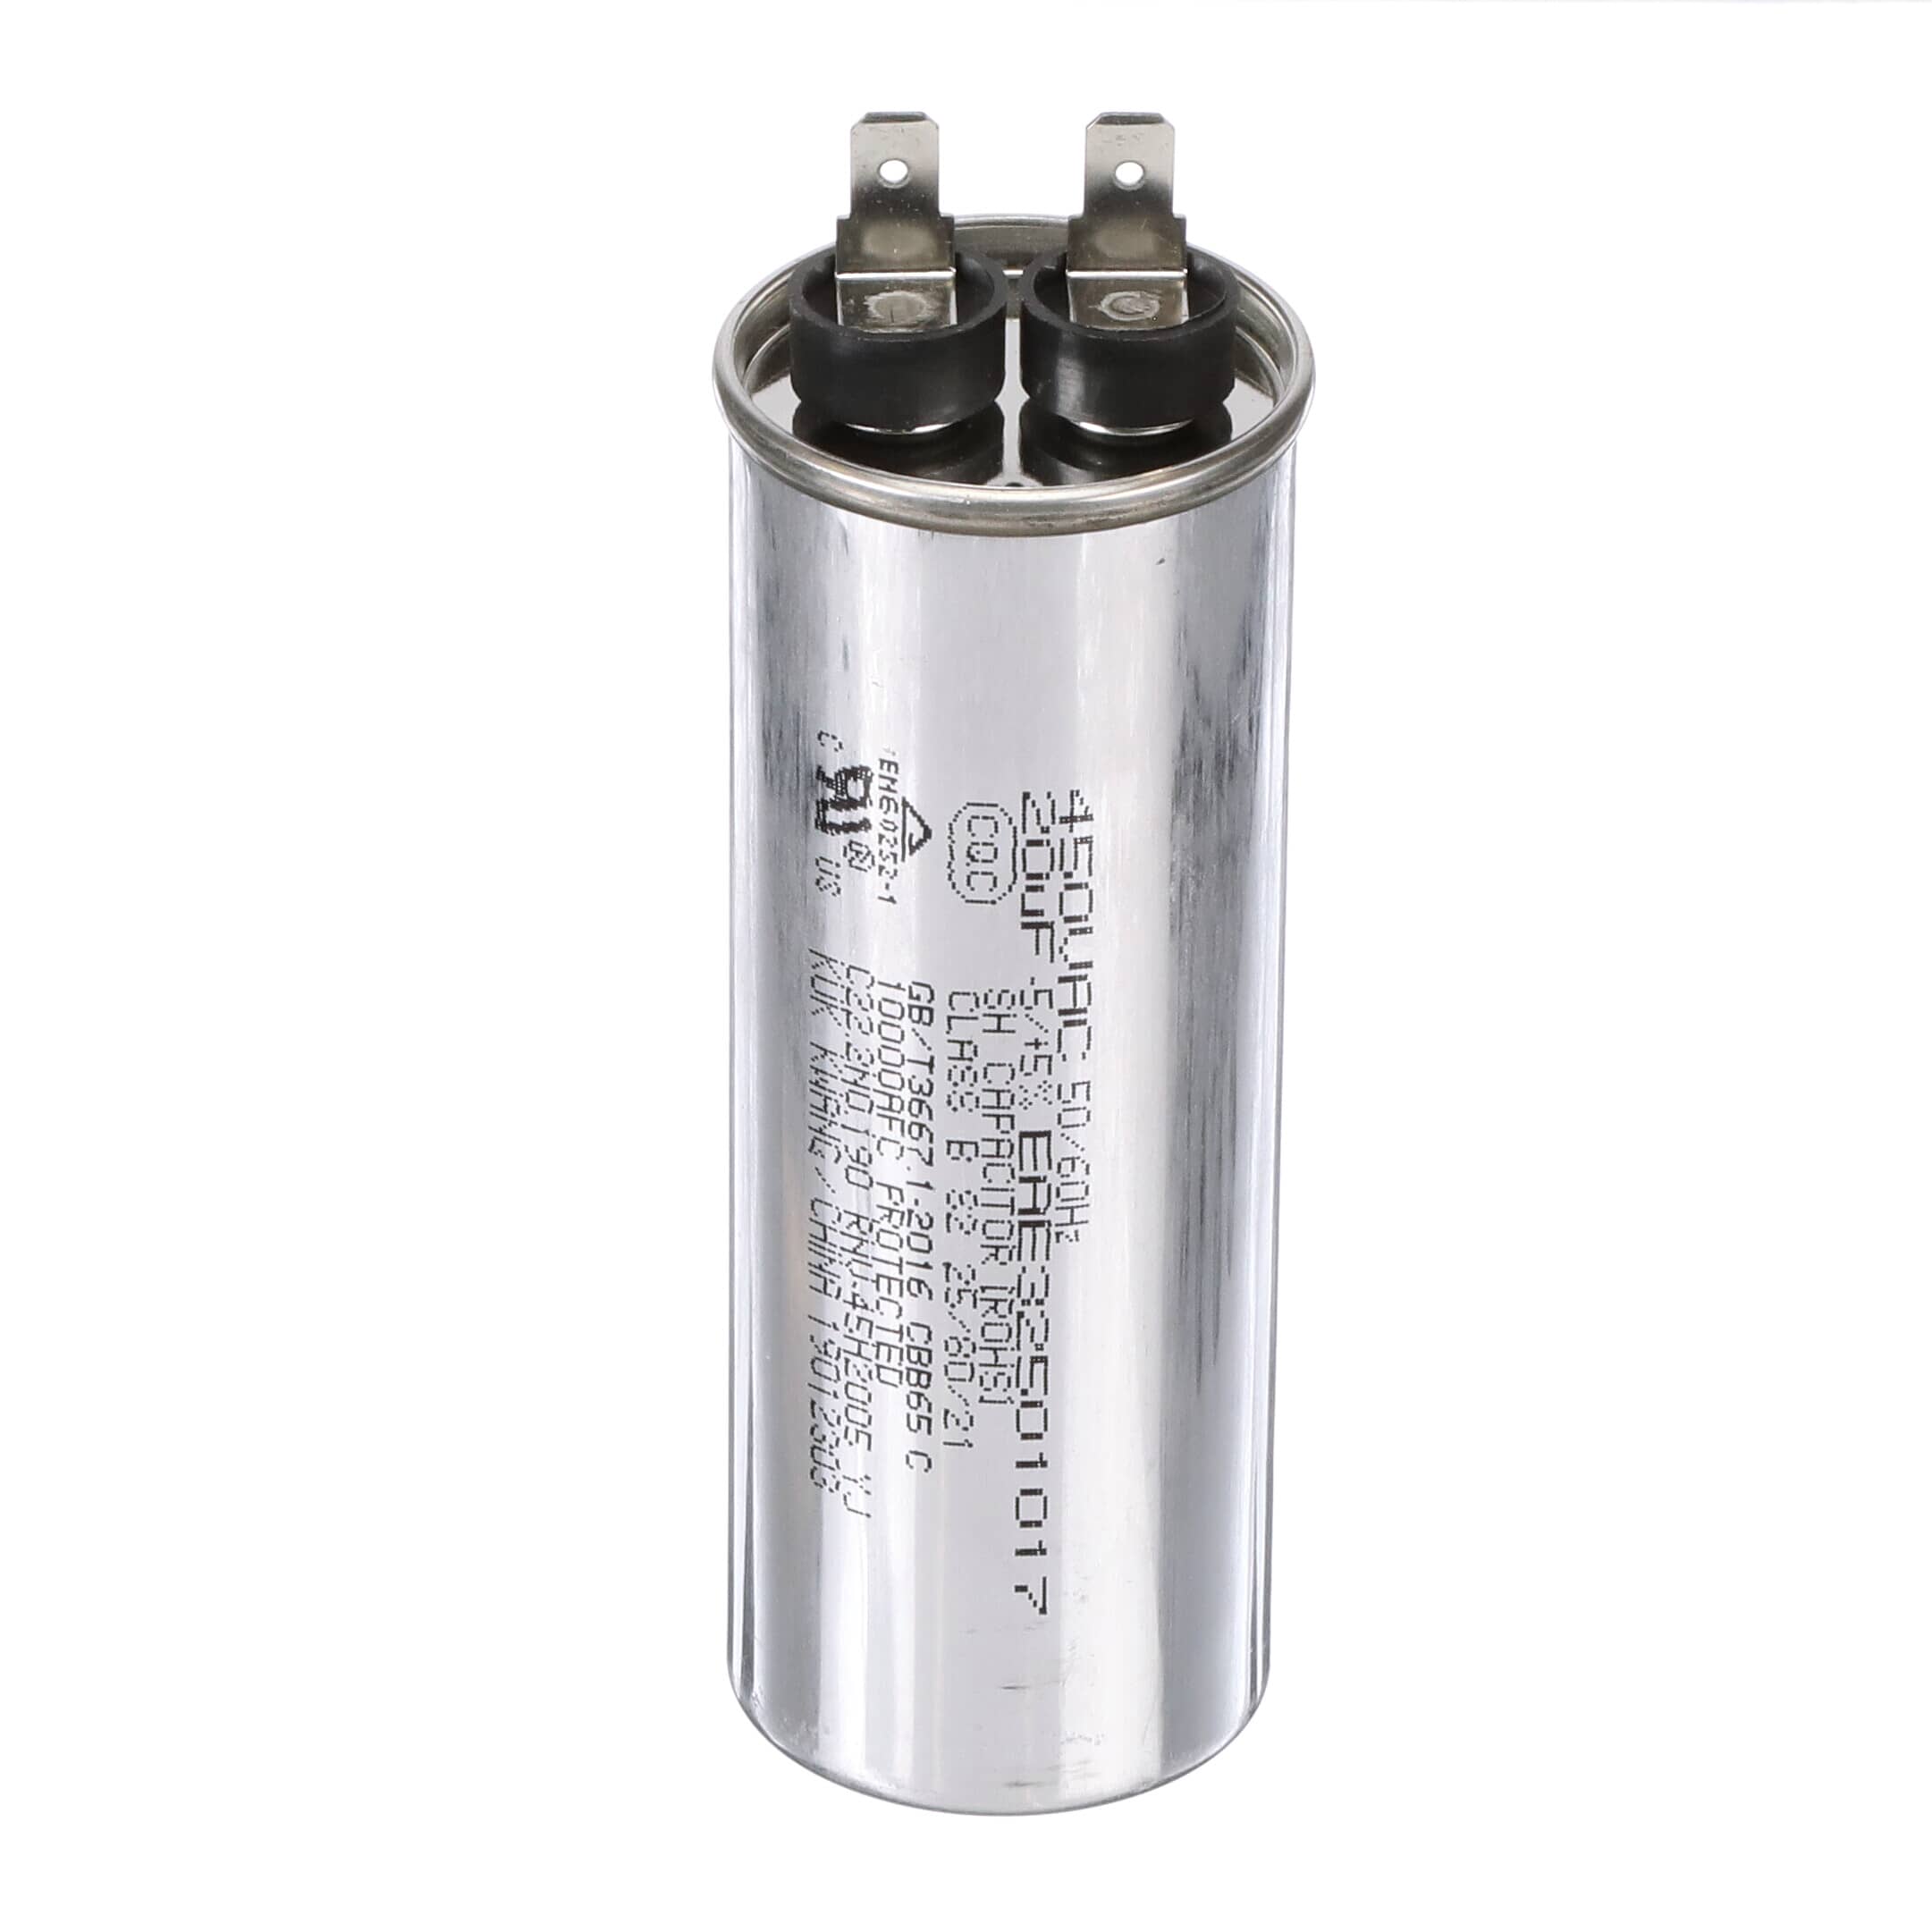 LG EAE32501017 Electric Appliance Capacitor